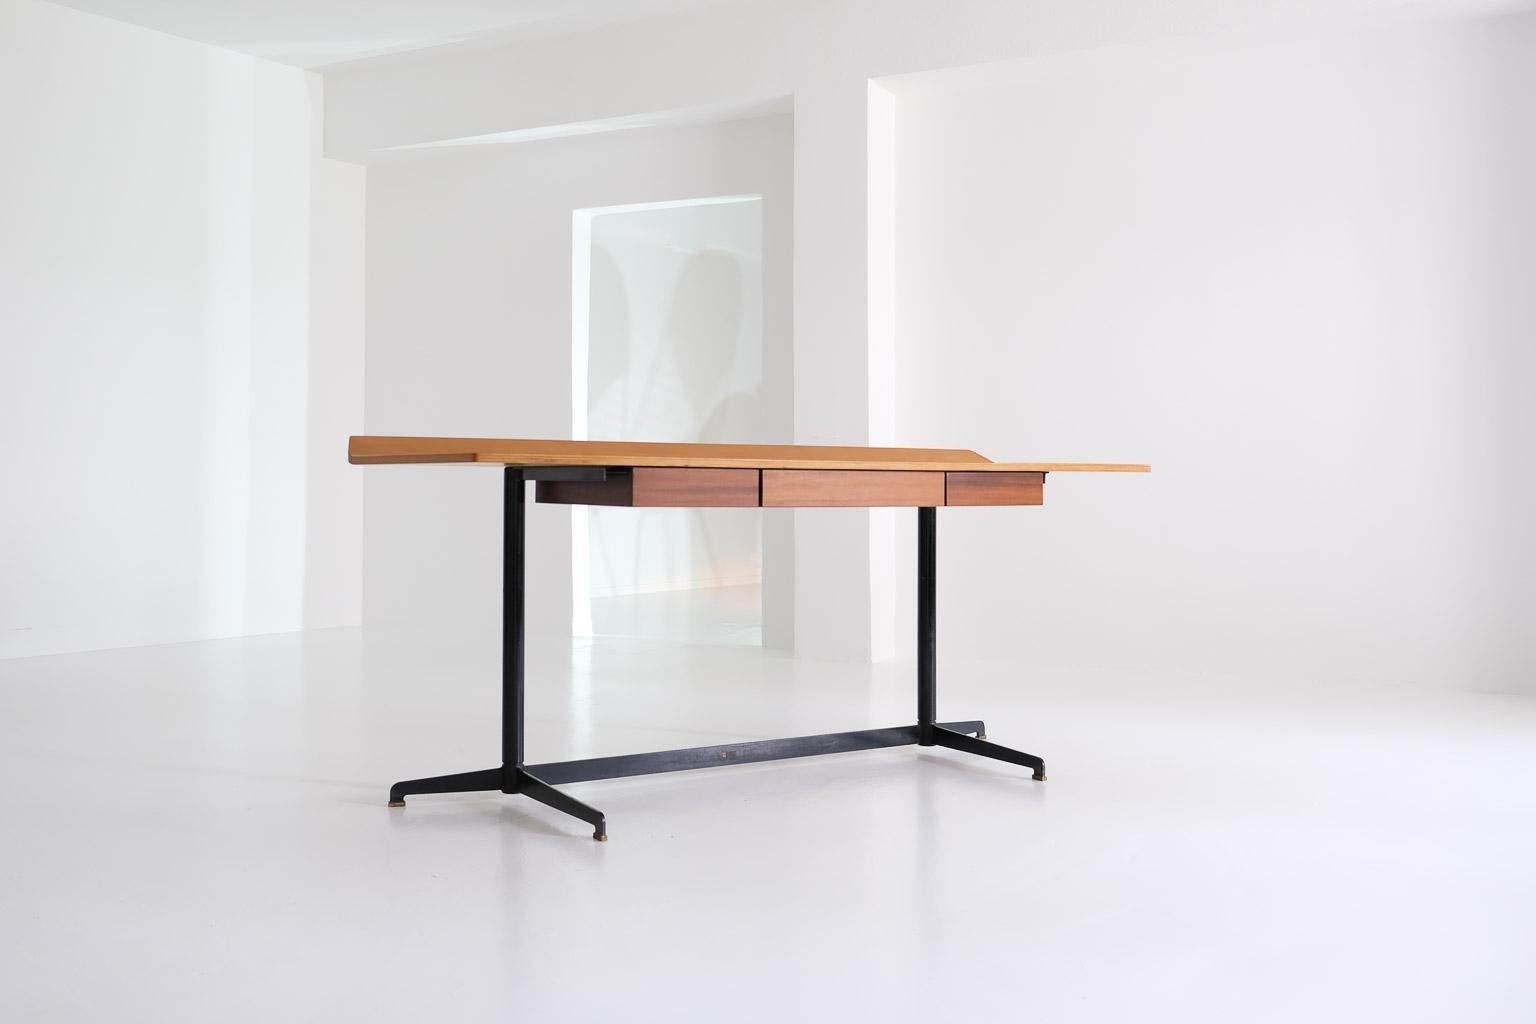 Osvaldo Borsani, early model of t90 desk for tecno, presented at the 10th triennial in 1954, milano, italy. minimalist, elegant – and practical: the raised rear edge of the worktop prevents writing pens from rolling down the back. shaped, curved ply